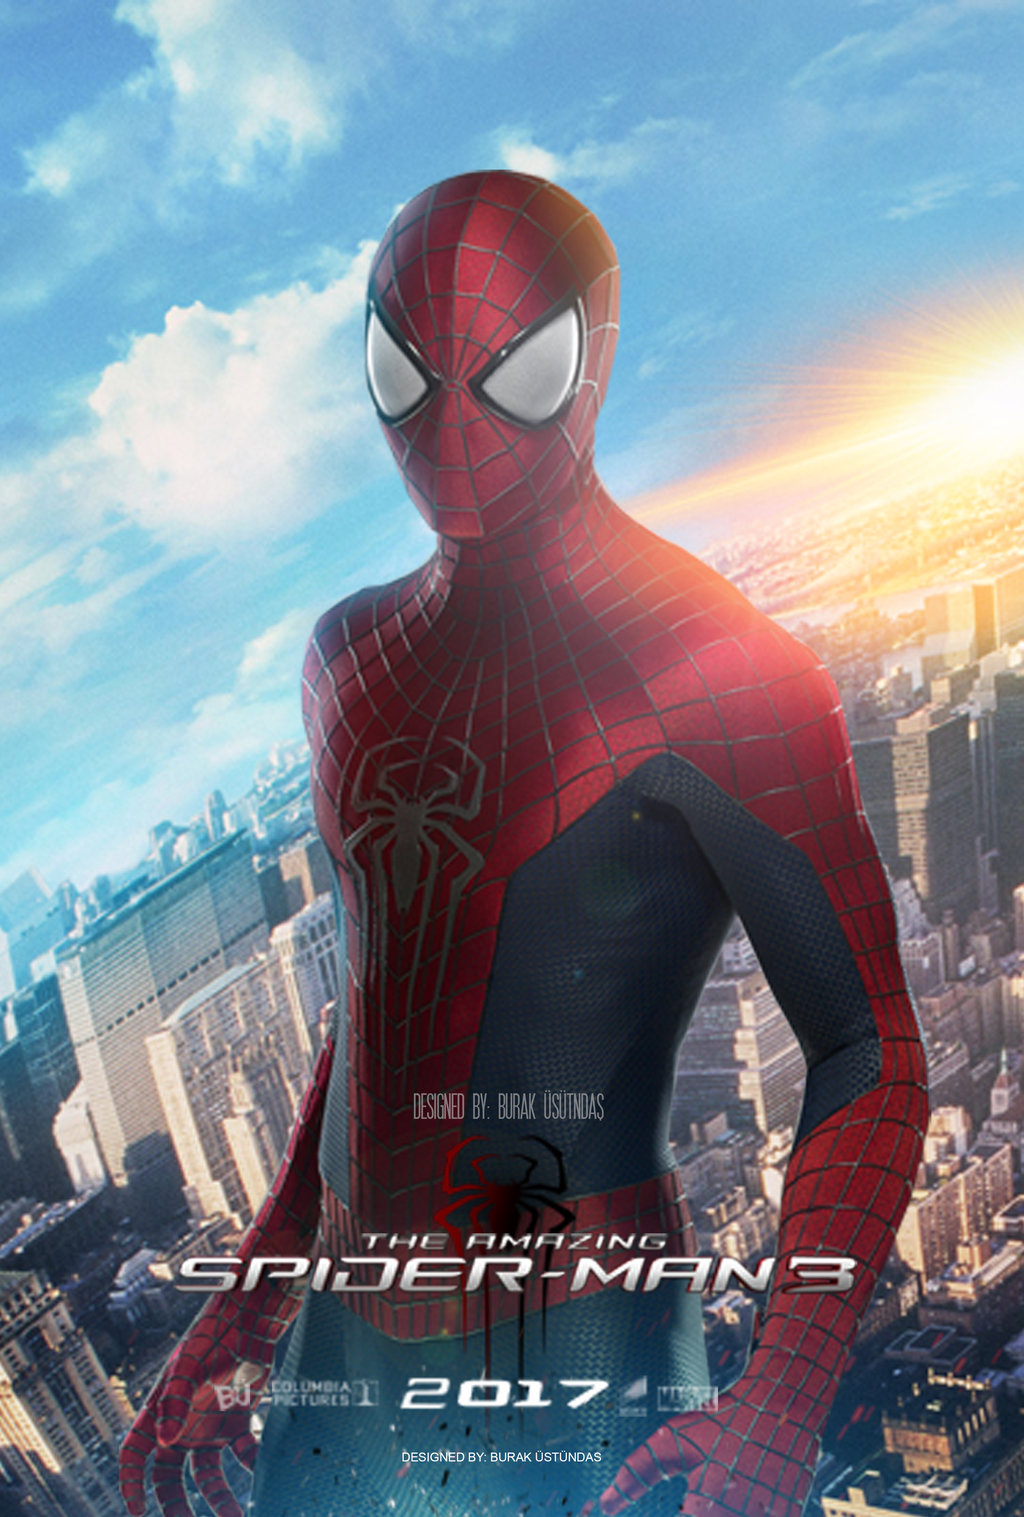 The Amazing Spider Man 3 Poster by burakrall on